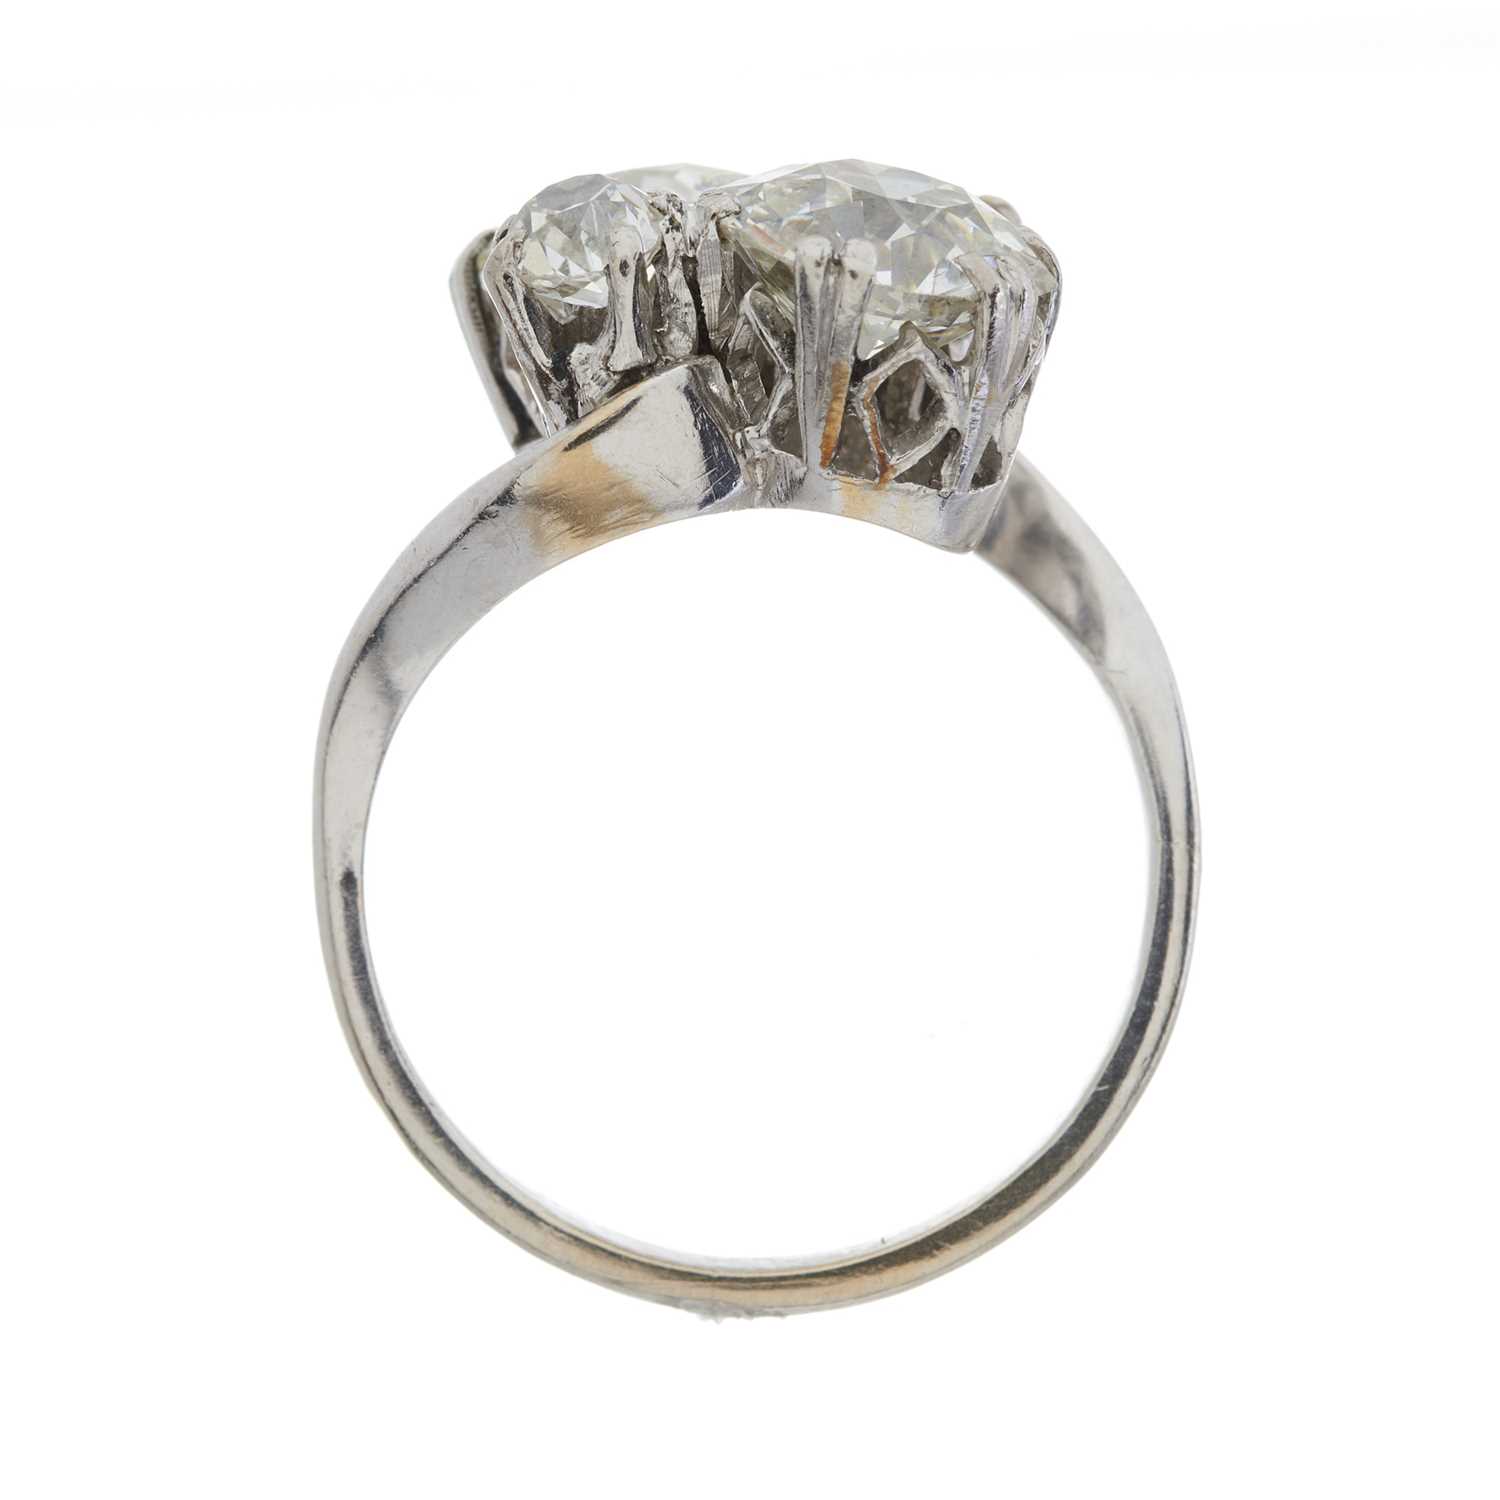 An early 20th century old-cut diamond crossover ring - Image 2 of 3